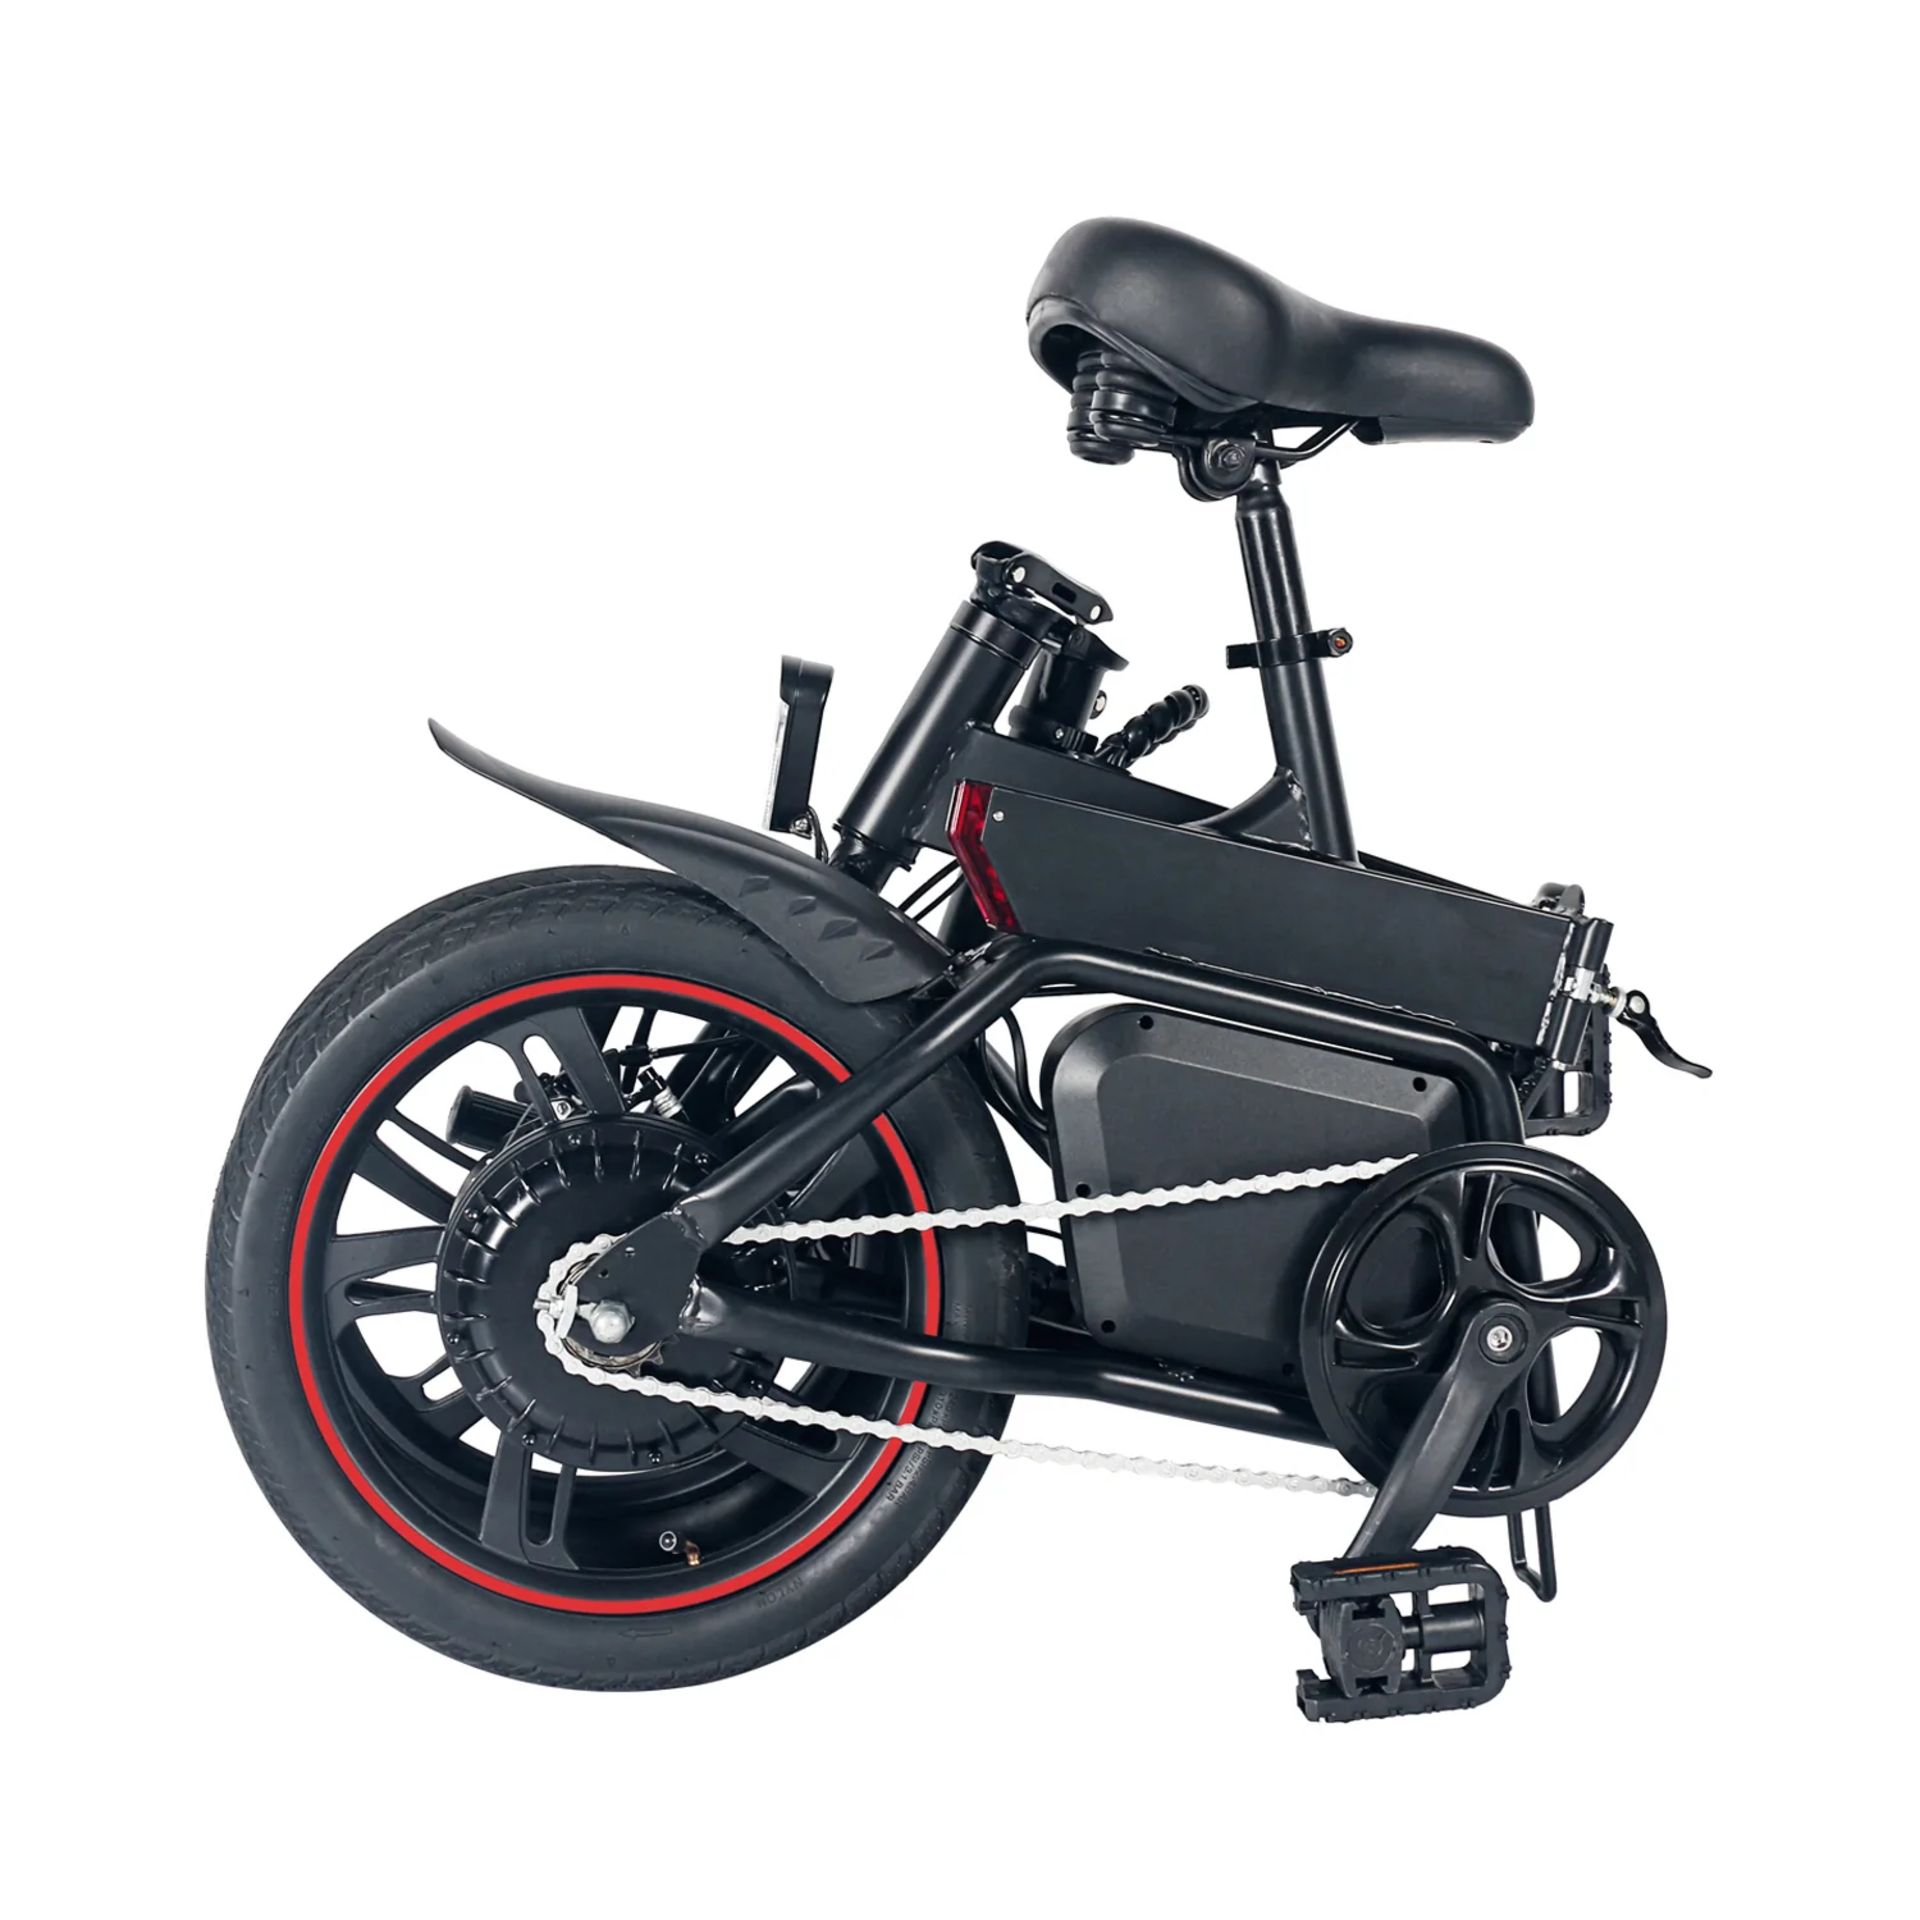 Windgoo B20 Pro Electric Bike. RRP £1,100.99. With 16-inch-wide tires and a frame of upgraded - Bild 5 aus 7